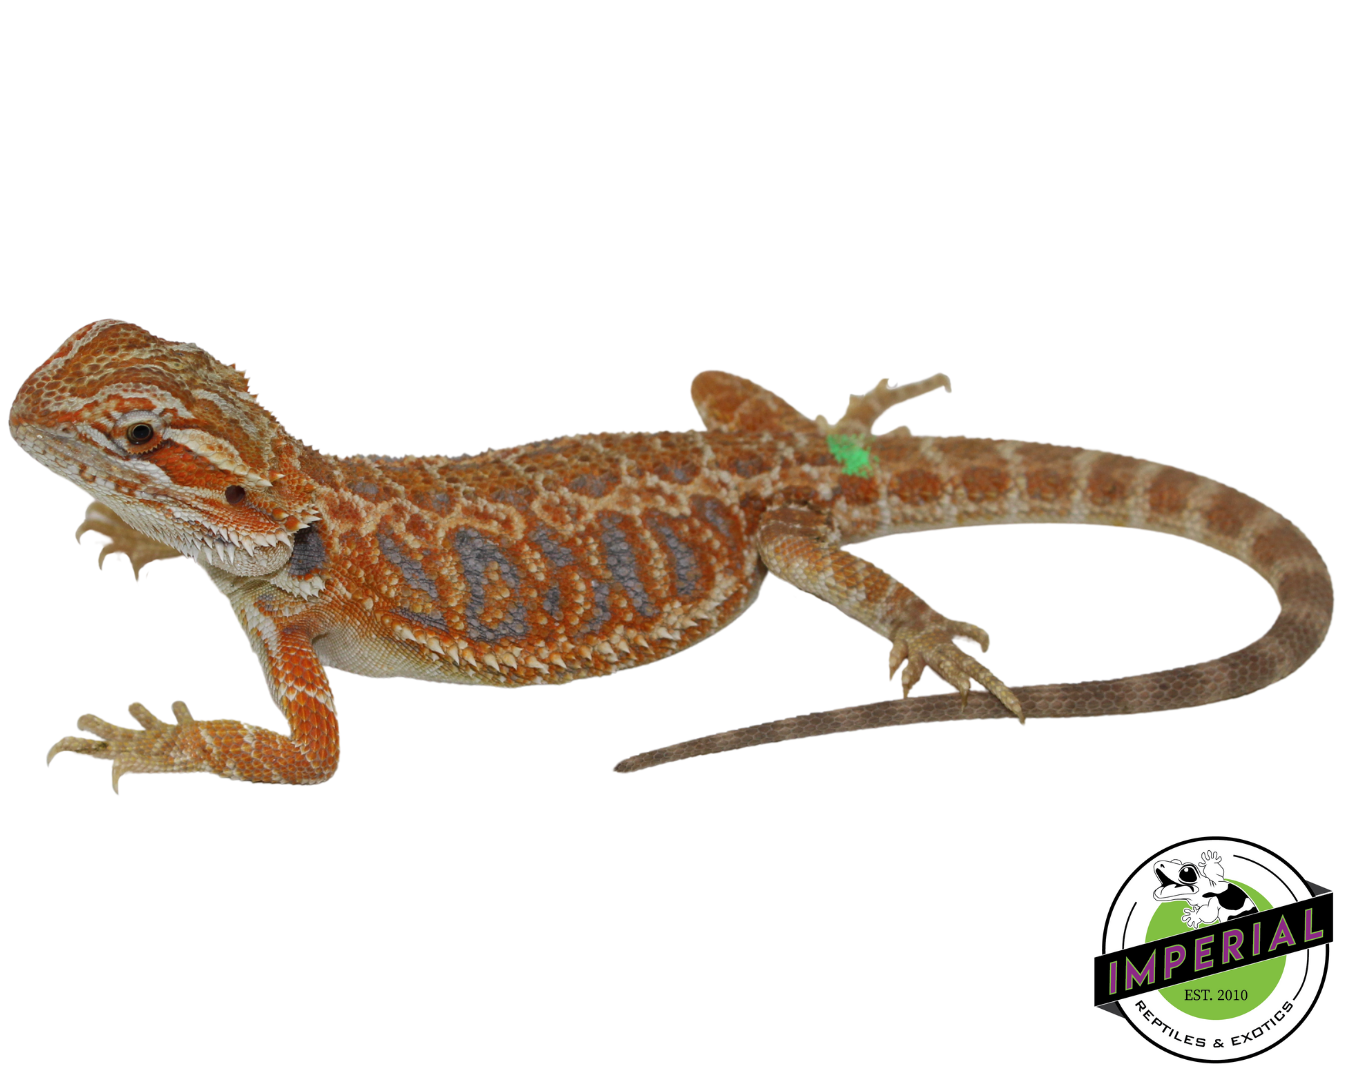 Hypo tiger bearded dragon for sale, reptiles for sale, buy animals online